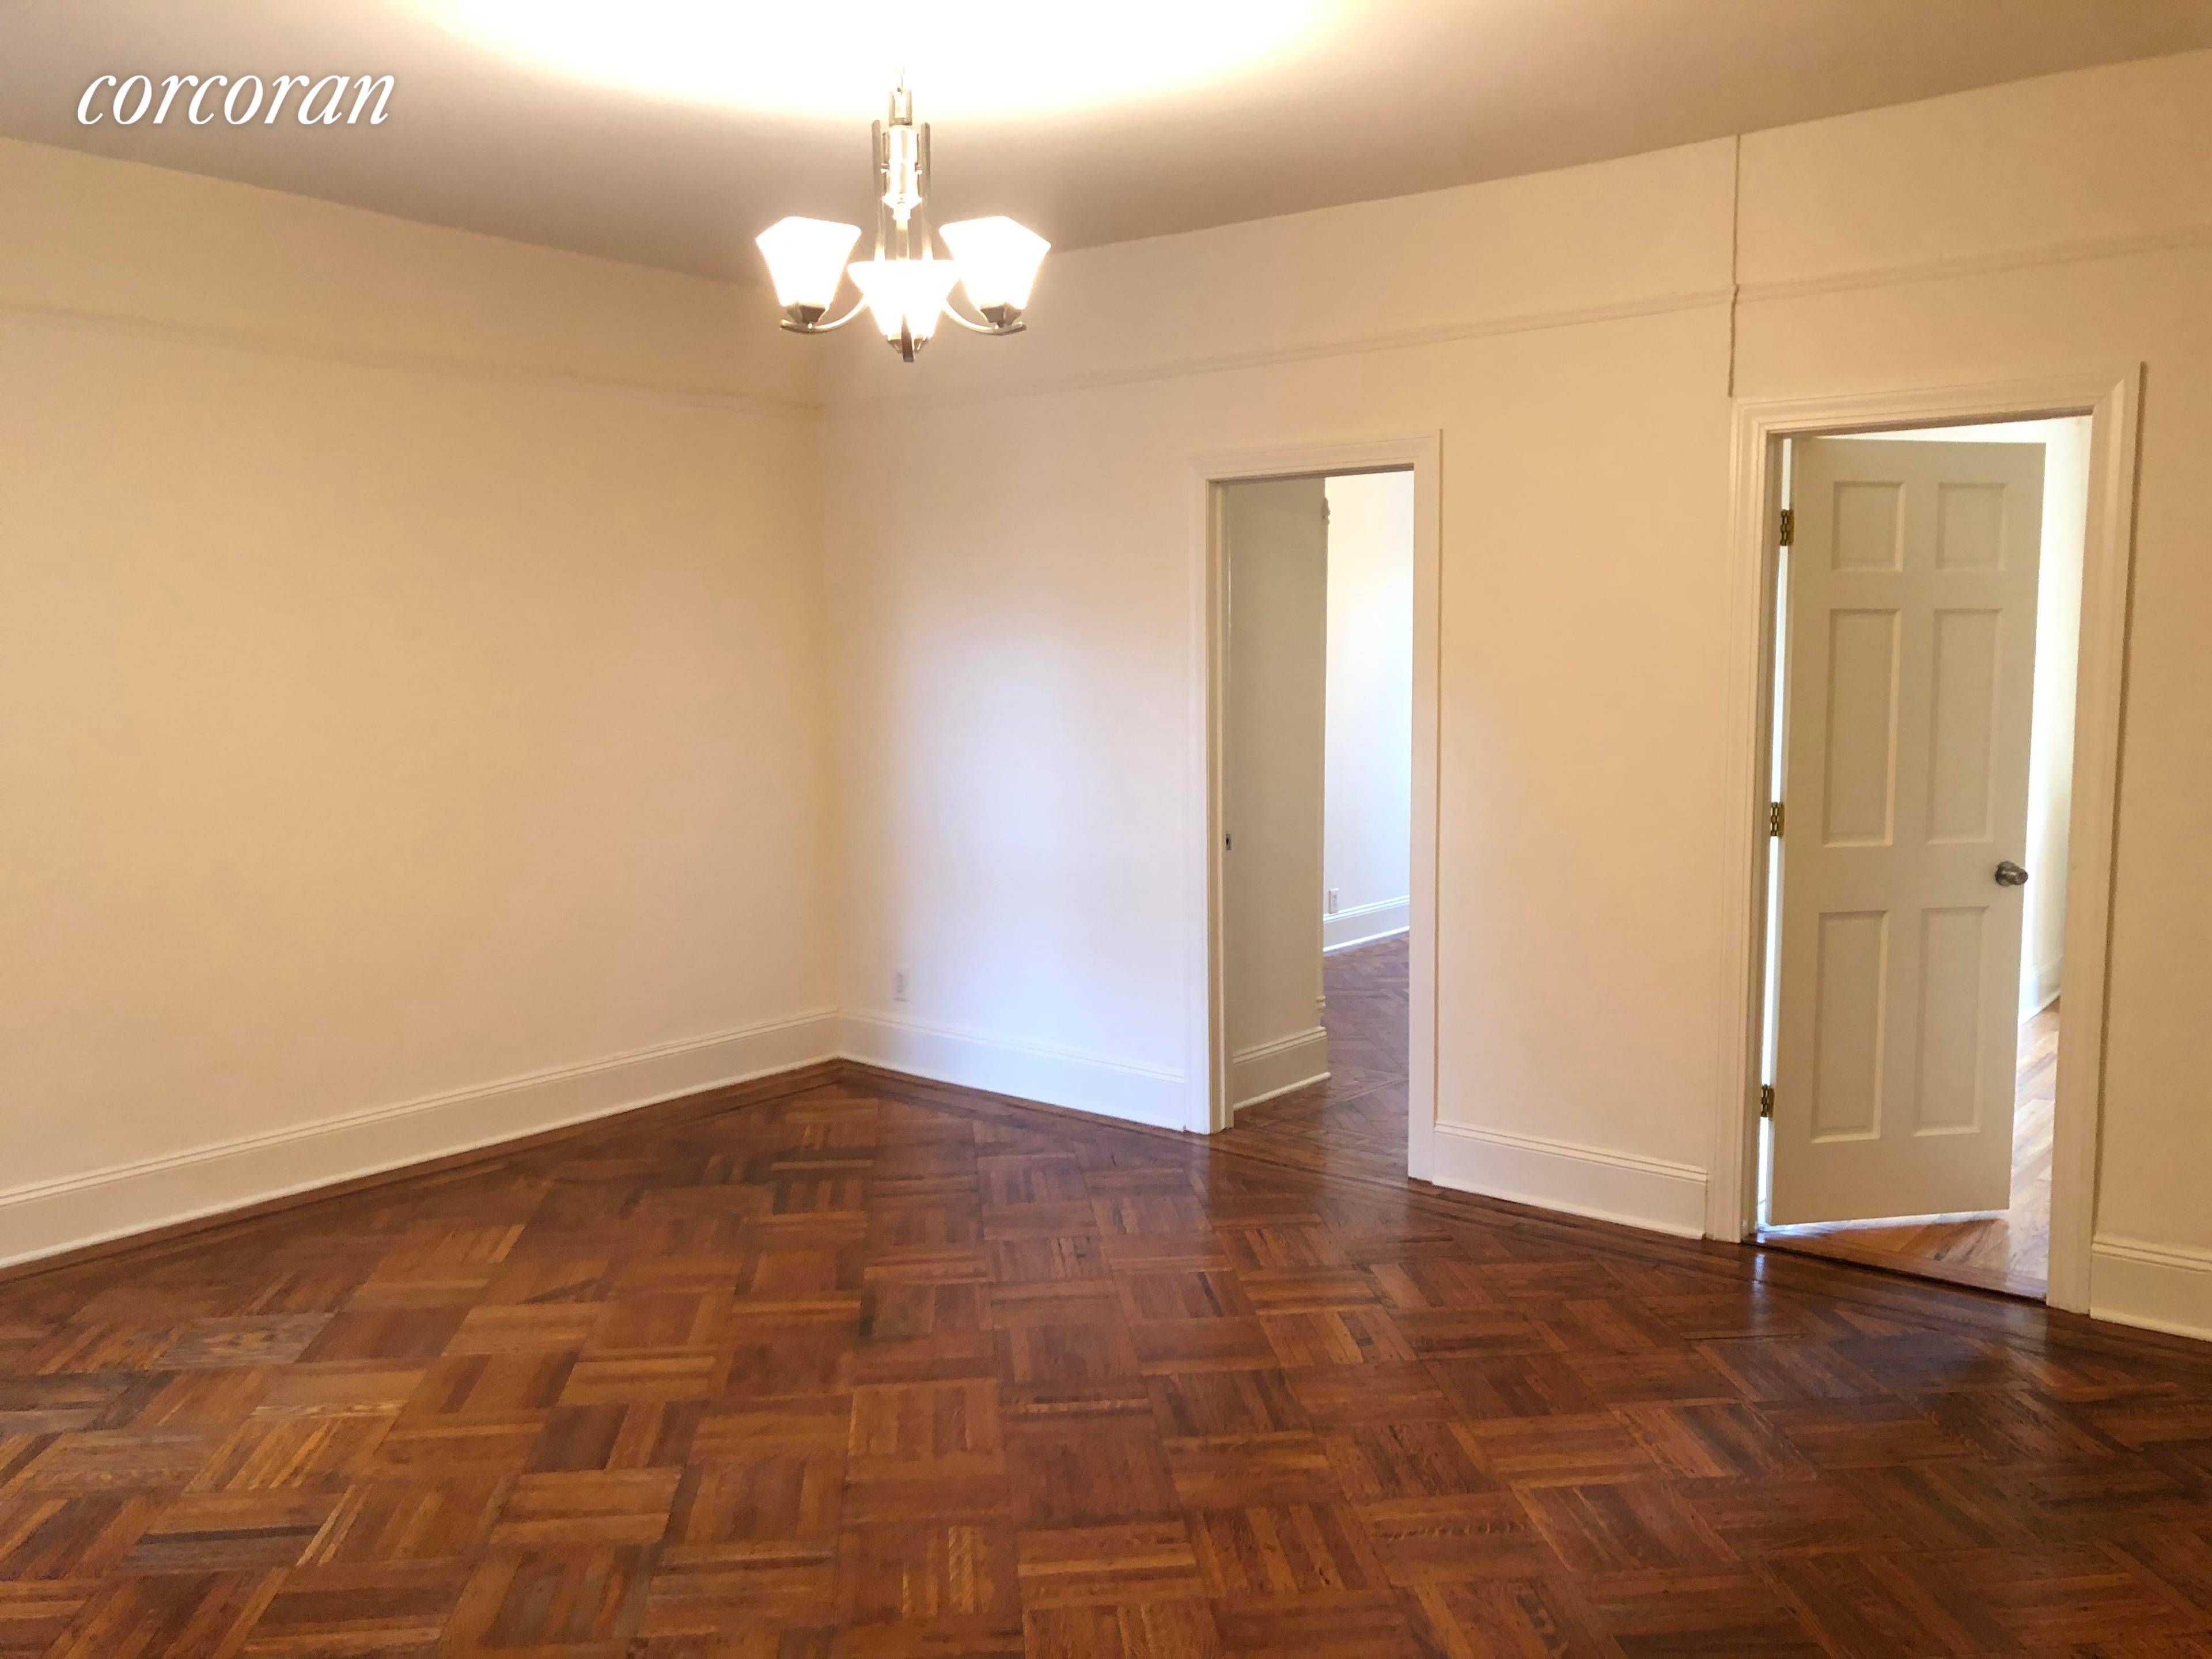 This spacious two bed apartment is close to Brooklyn Heights Promenade, shopping, restaurants and multiple train lines.